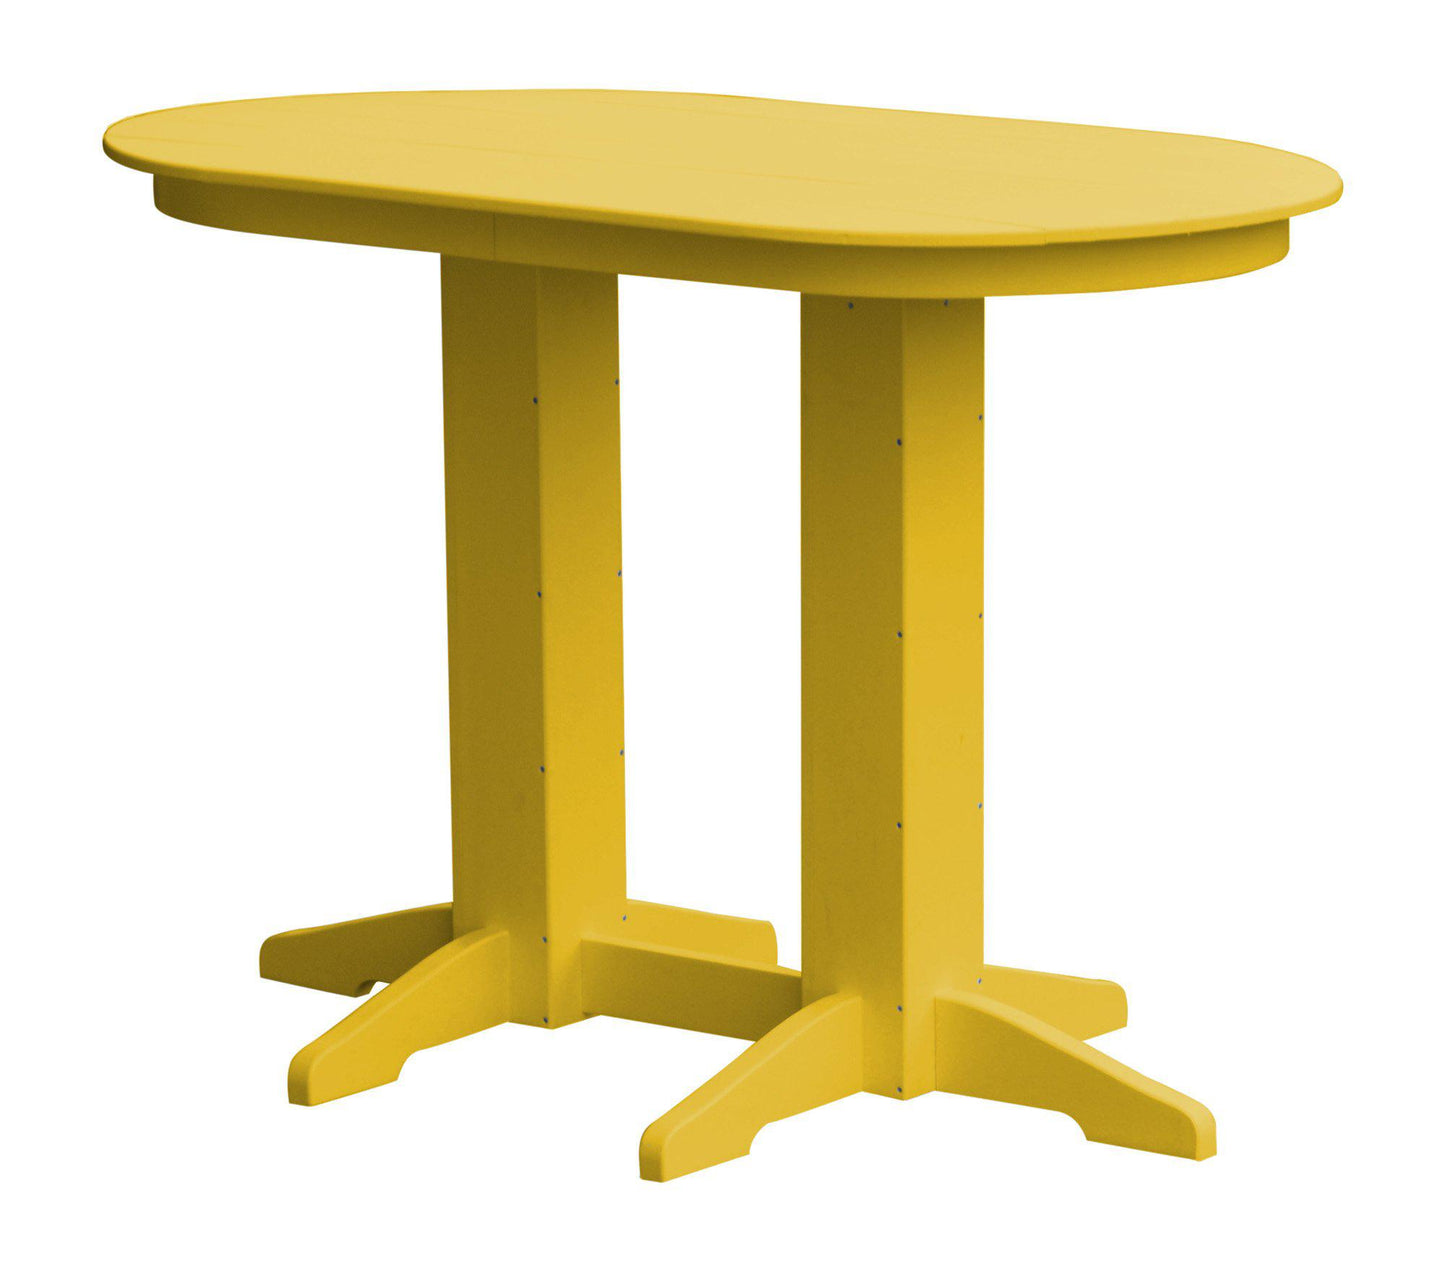 A&L Furniture Recycled Plastic 5' Oval Bar Table - Lemon Yellow